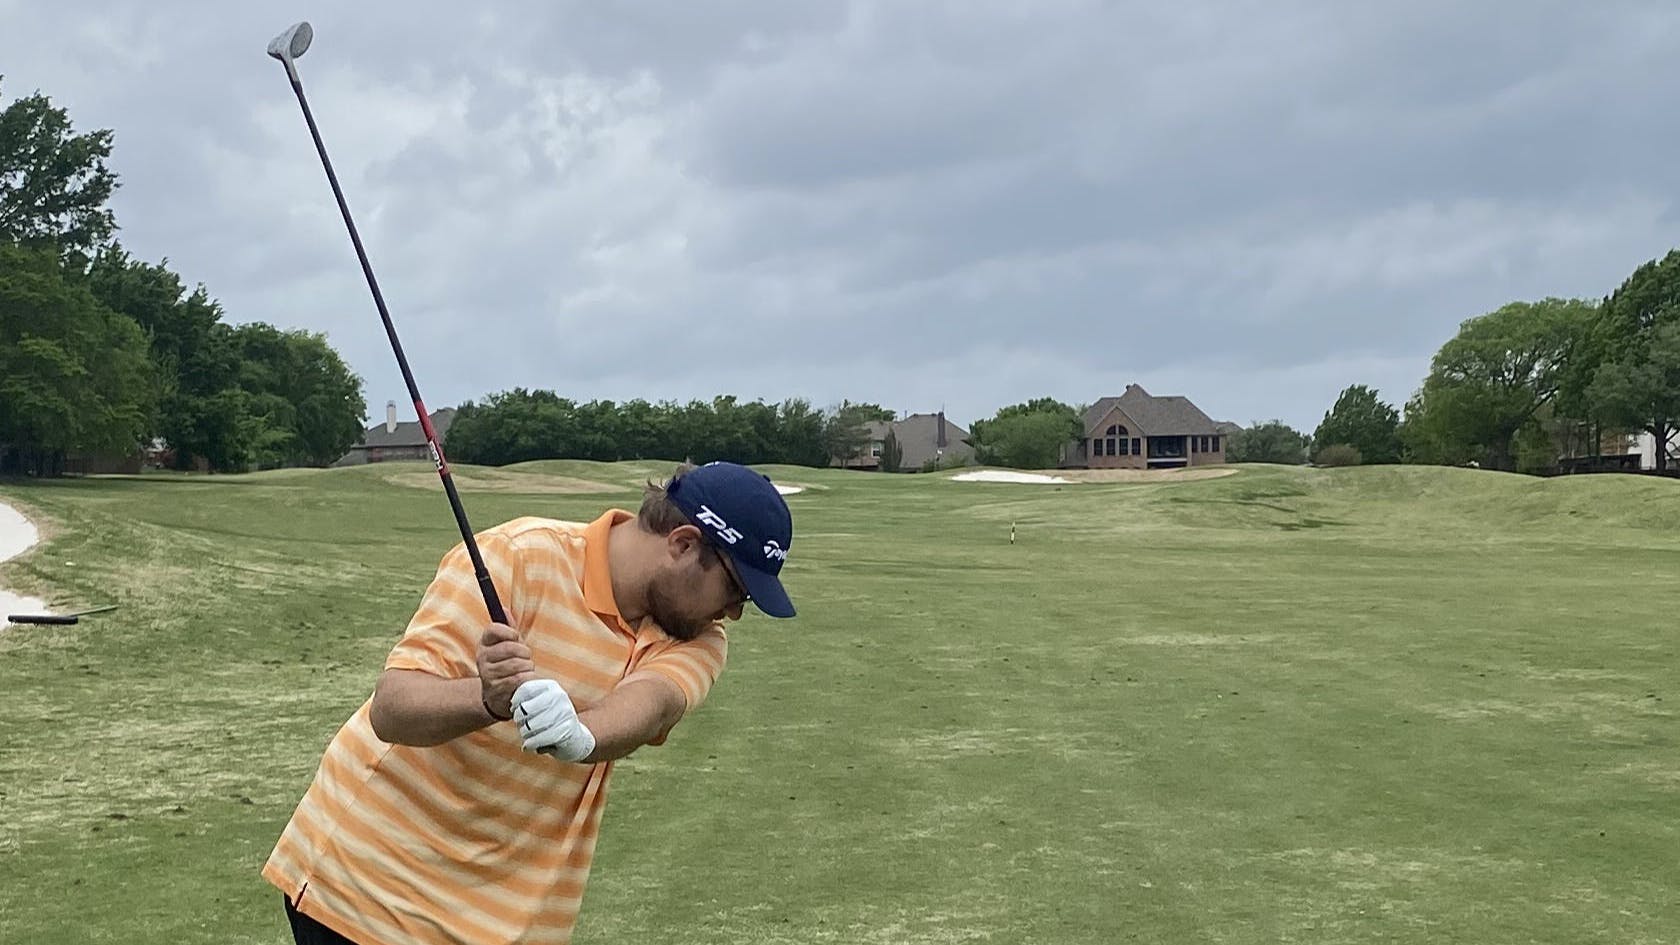 A man takes a swing with a golf club.